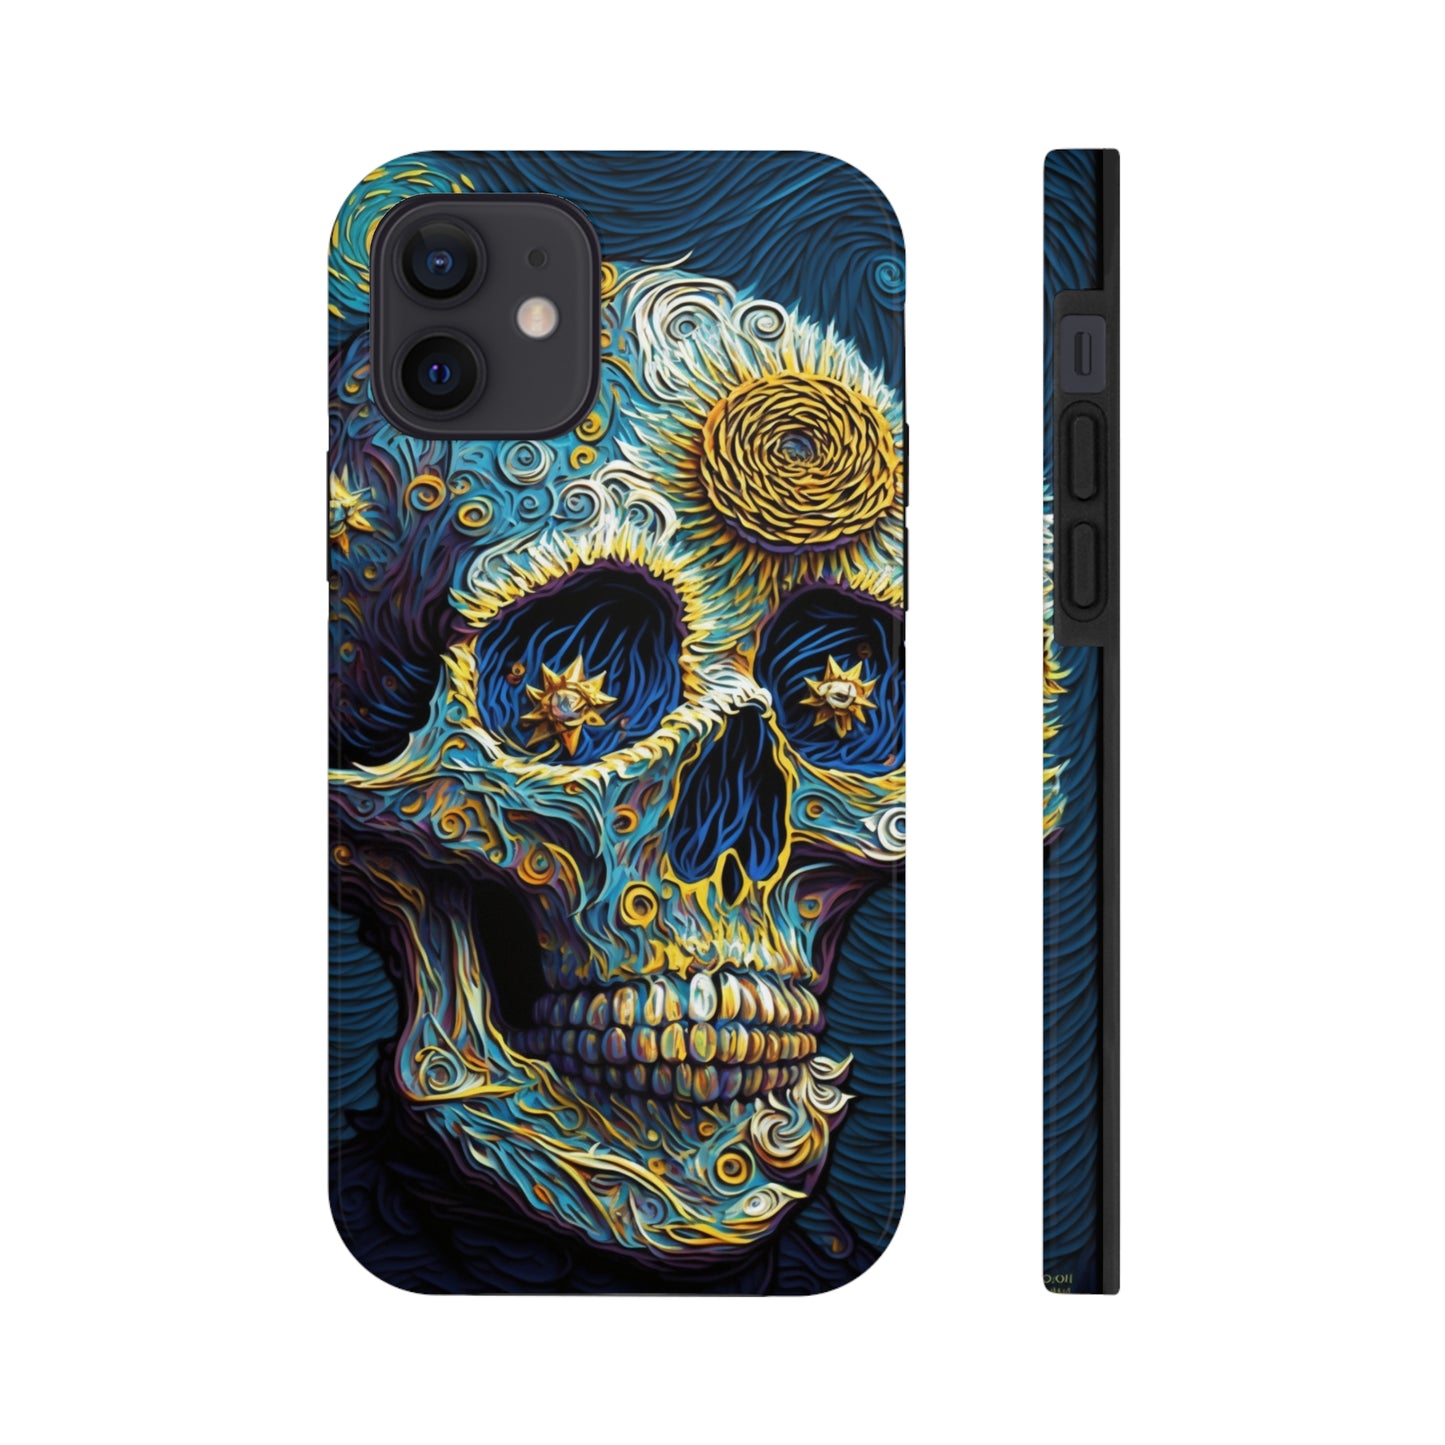 Artistic Fusion: Van Gogh-Inspired Sugar Skull Phone Case - Timeless Elegance Meets Cultural Iconography